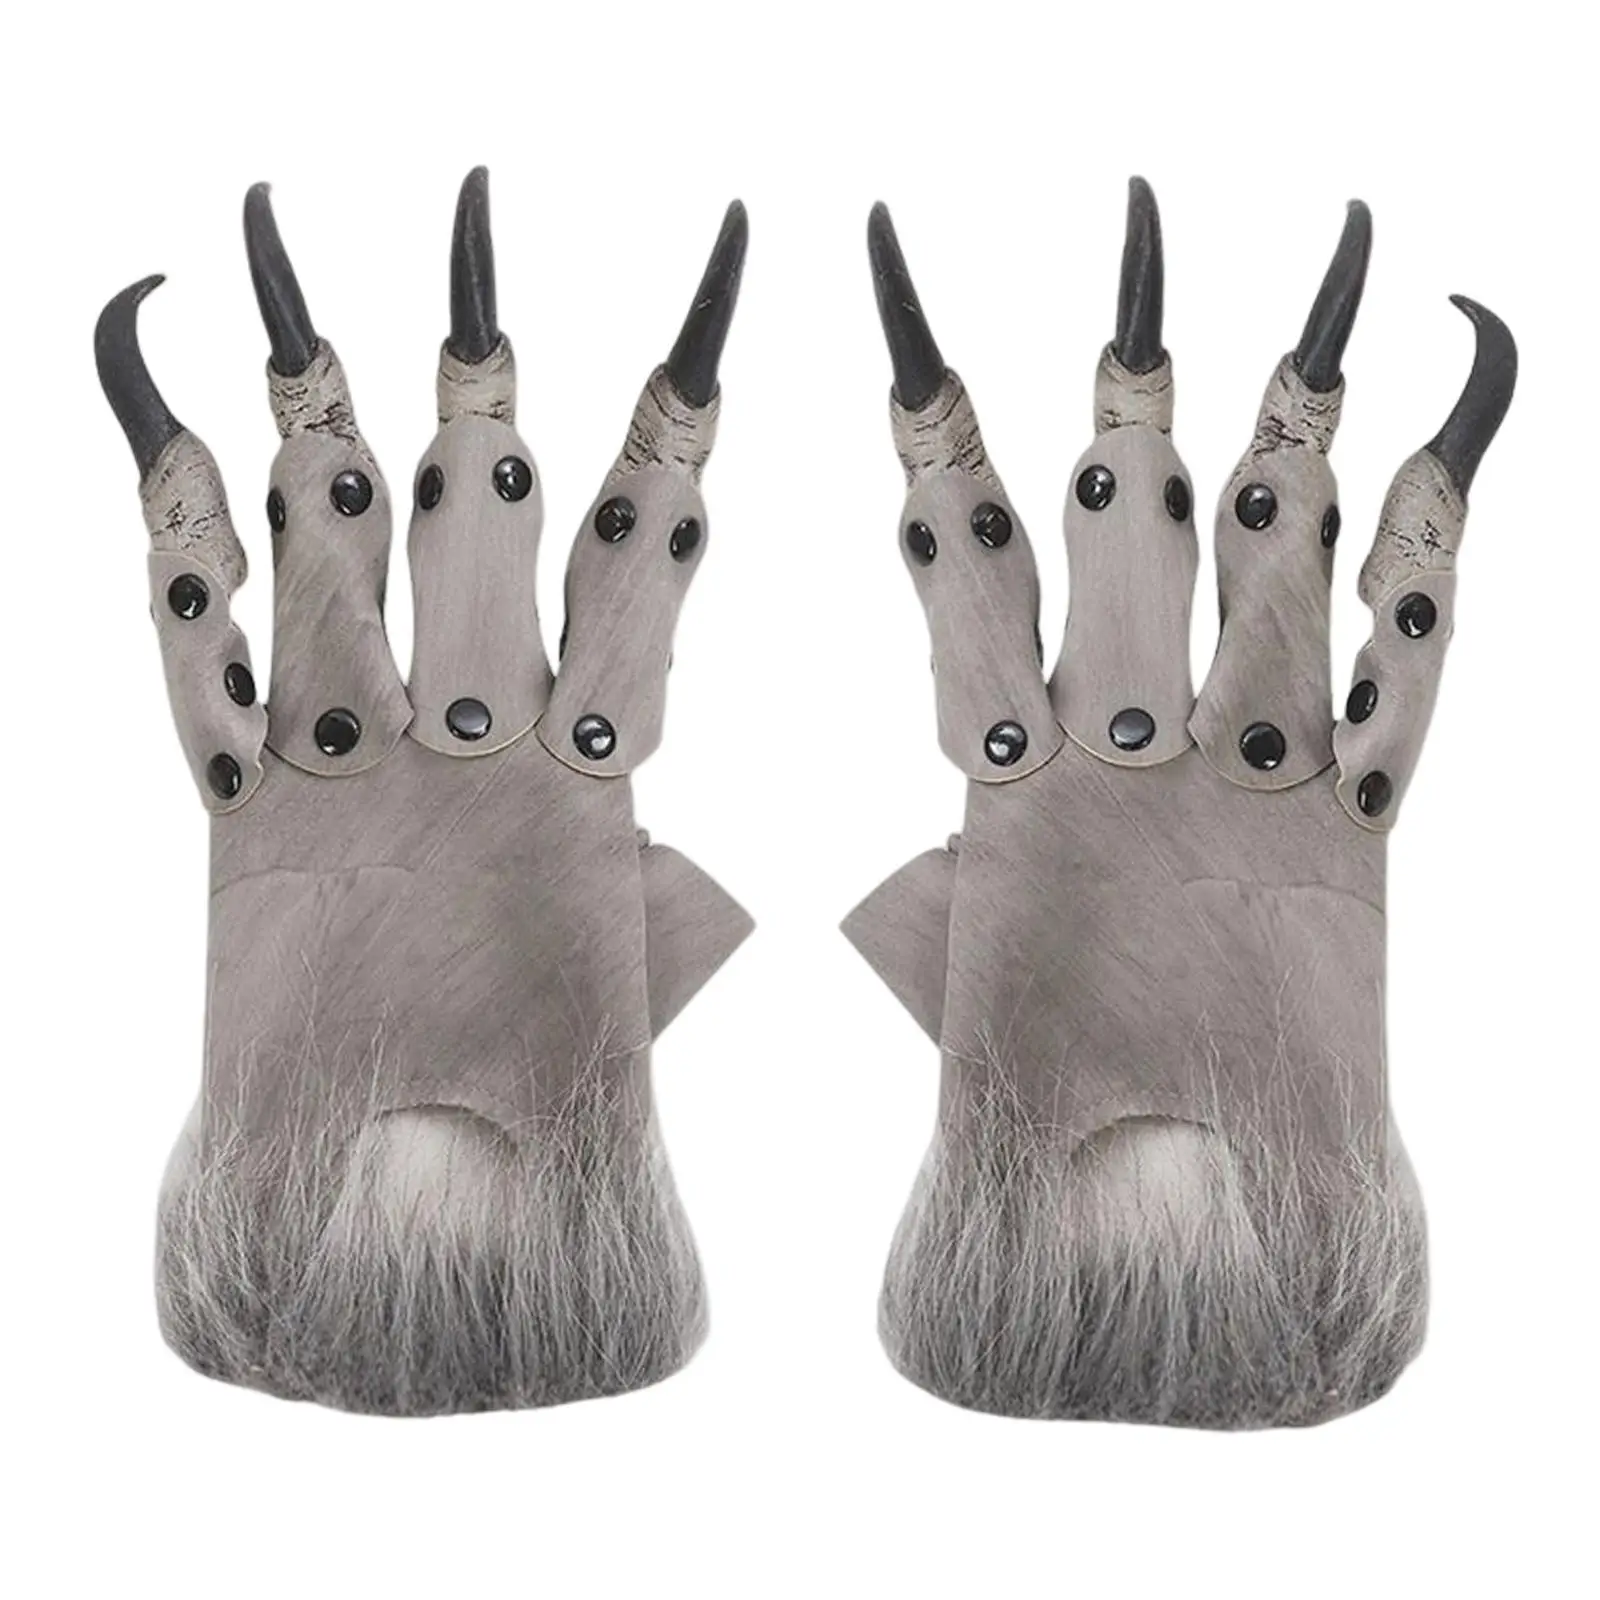 Creepy Halloween Dragon Glove Costume Claw Fancy Dress Easter Adult Mitts